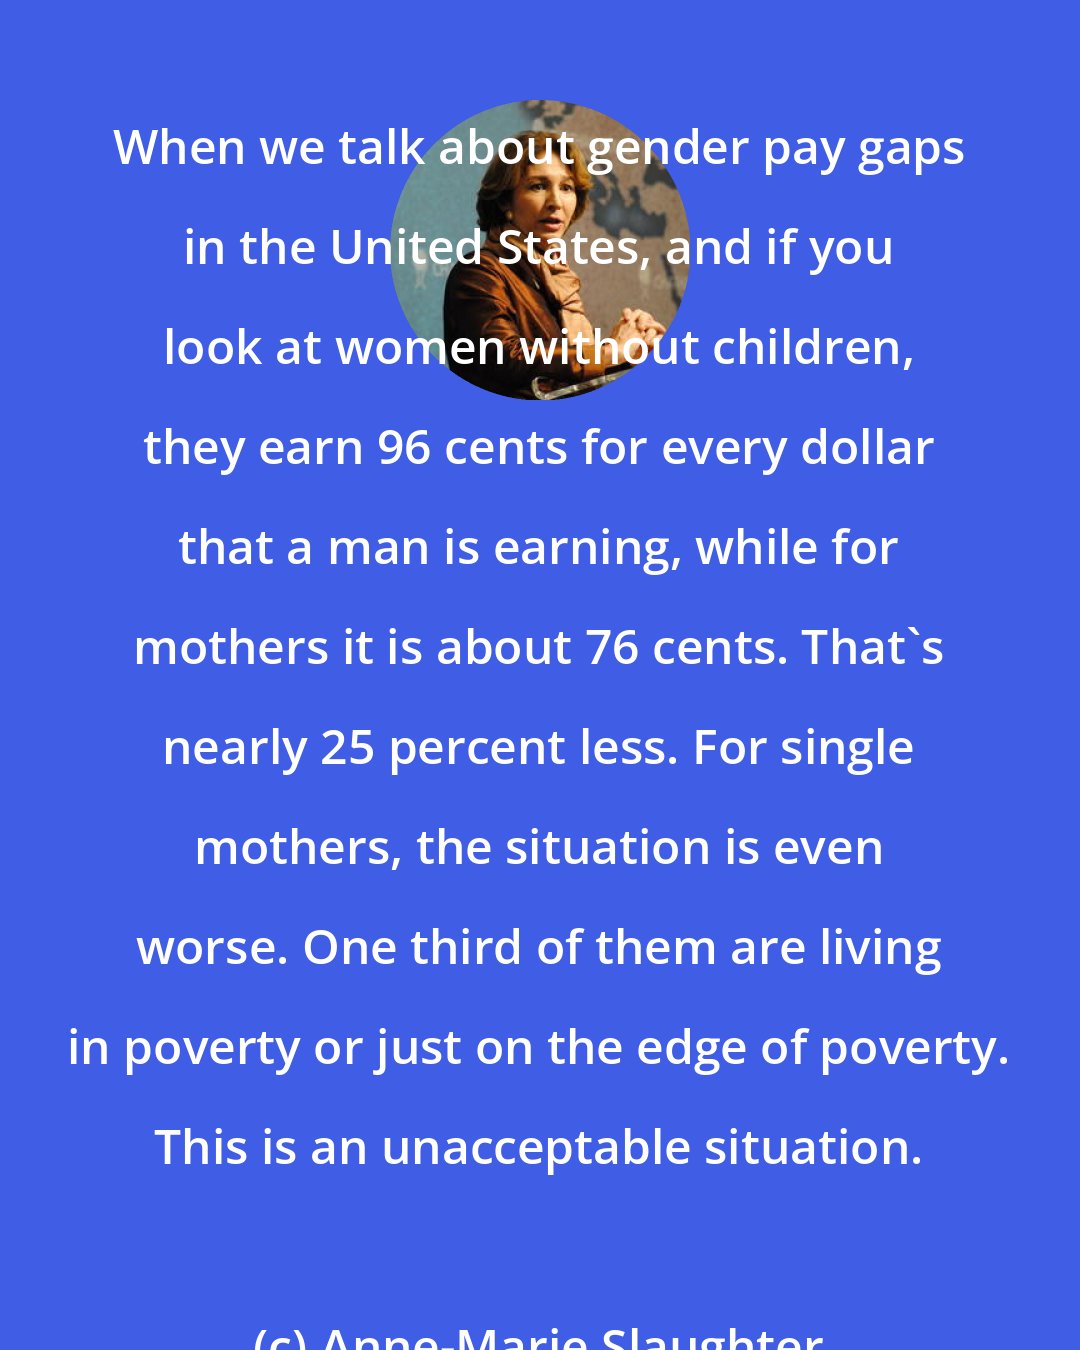 Anne-Marie Slaughter: When we talk about gender pay gaps in the United States, and if you look at women without children, they earn 96 cents for every dollar that a man is earning, while for mothers it is about 76 cents. That's nearly 25 percent less. For single mothers, the situation is even worse. One third of them are living in poverty or just on the edge of poverty. This is an unacceptable situation.